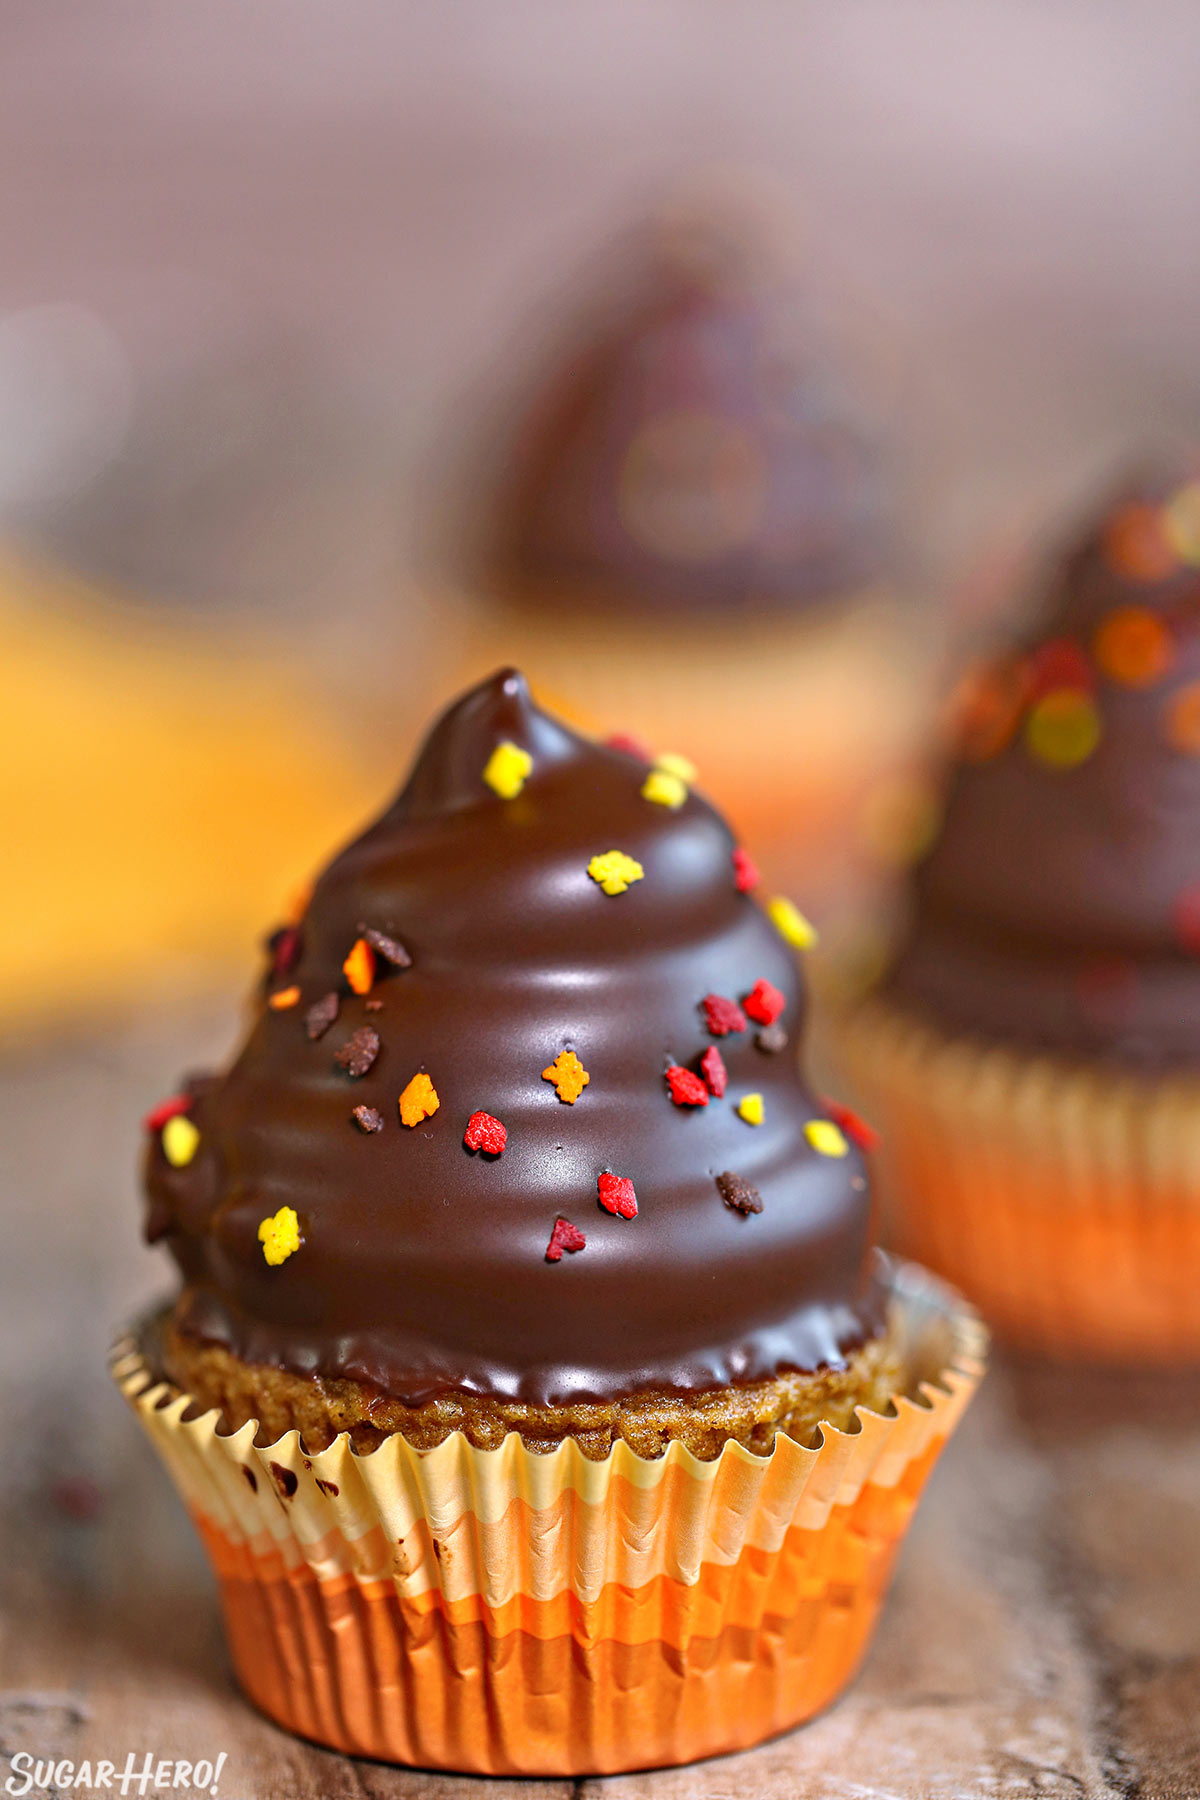 Pumpkin Spice Hi-Hat Cupcakes - Straight shot of a a hi-hat cupcake with sprinkles on top. | From SugarHero.com